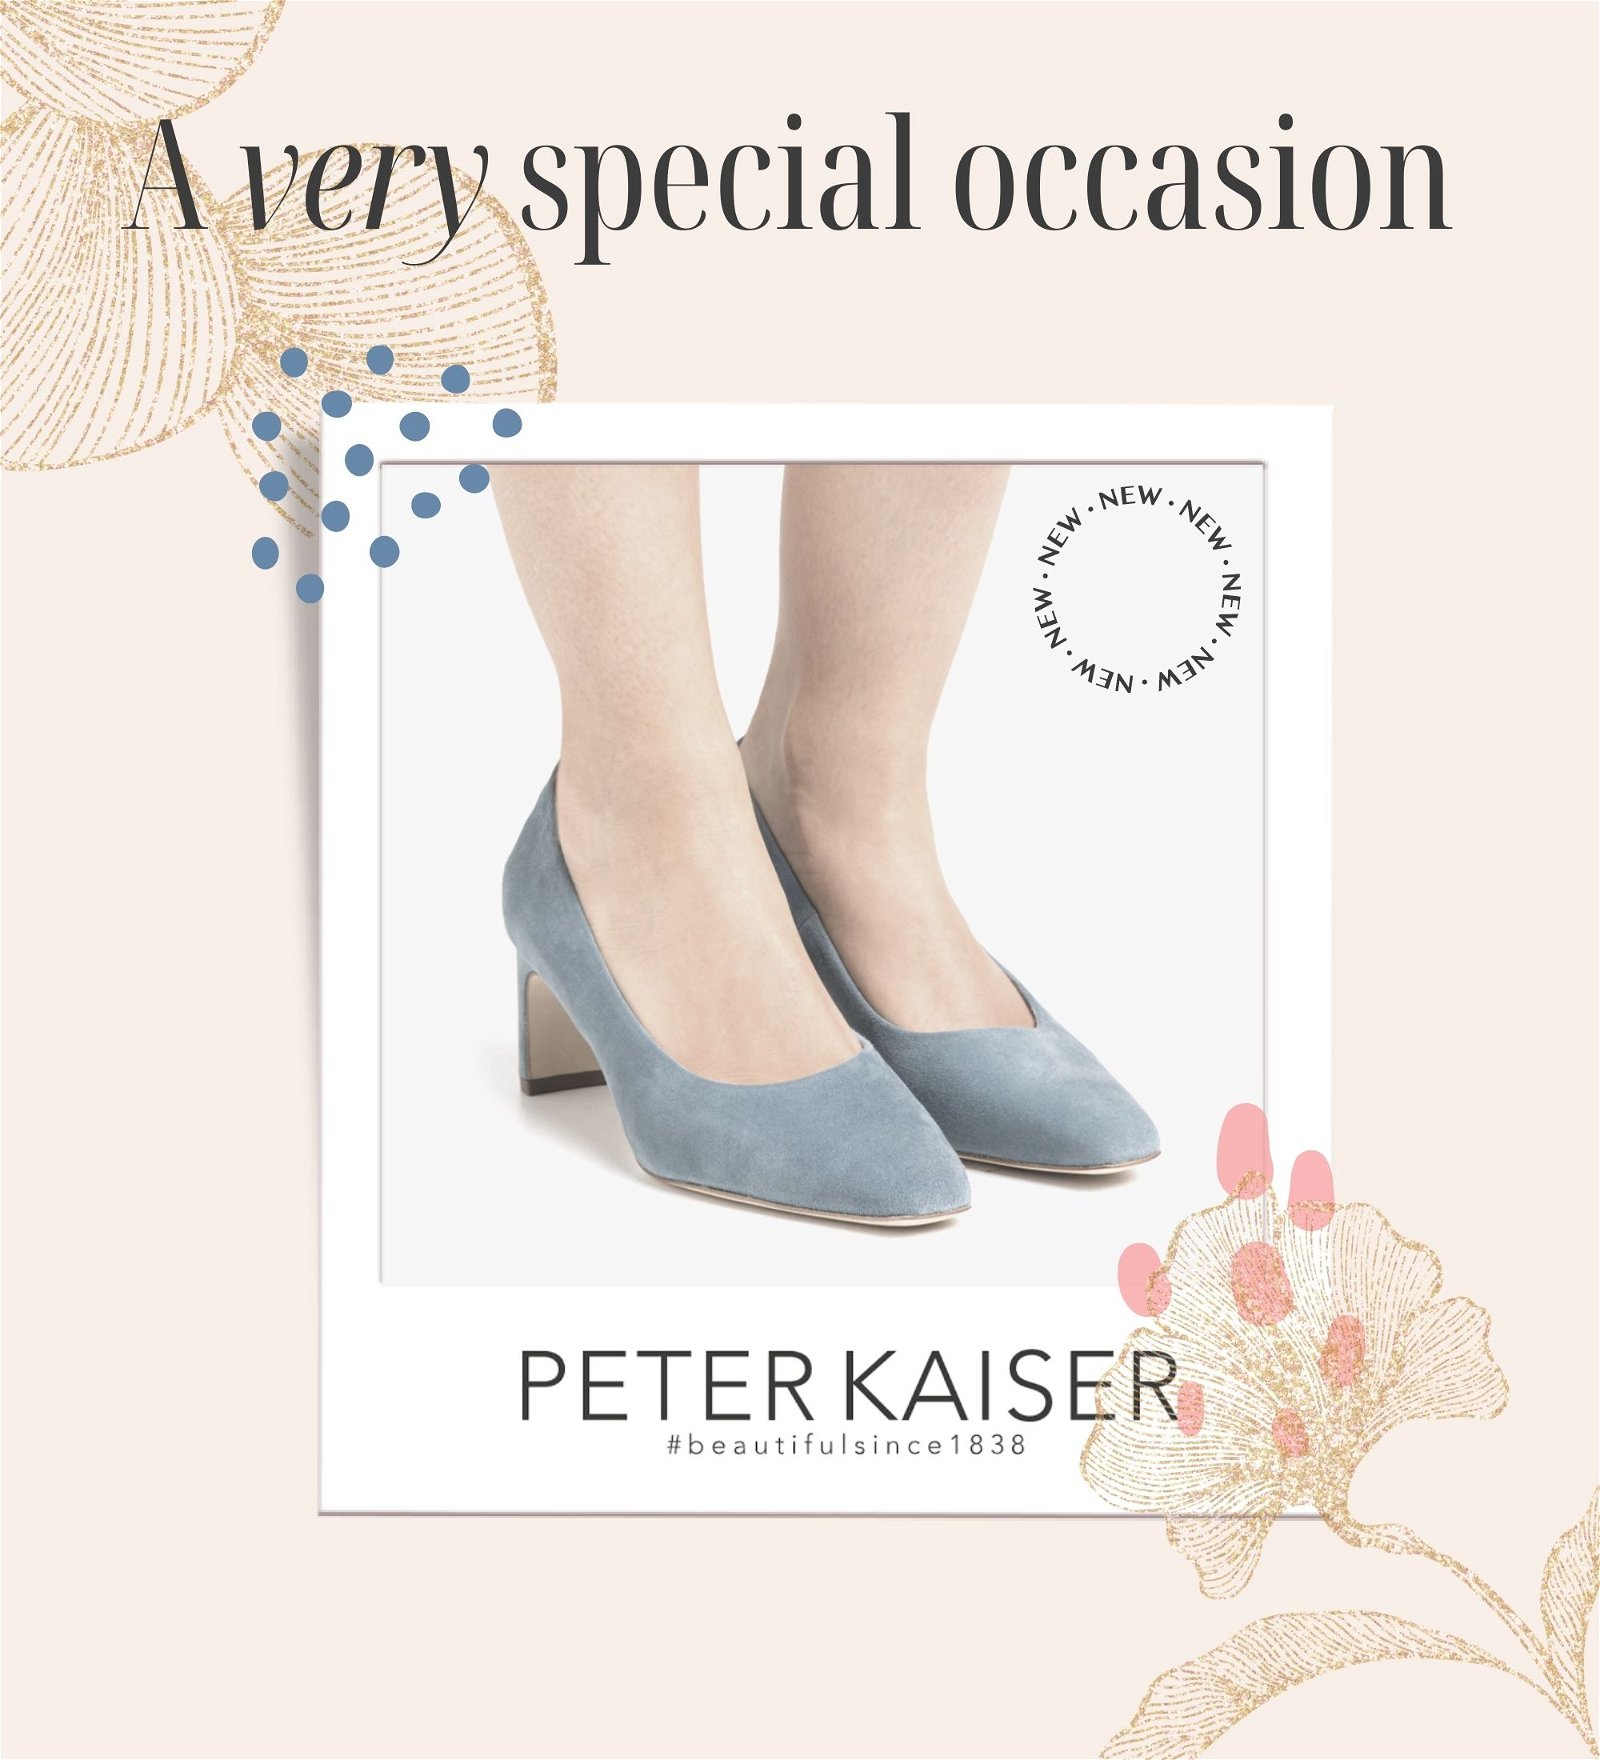 Mozimo new in Peter Kaiser Occasion Shoes and Bags